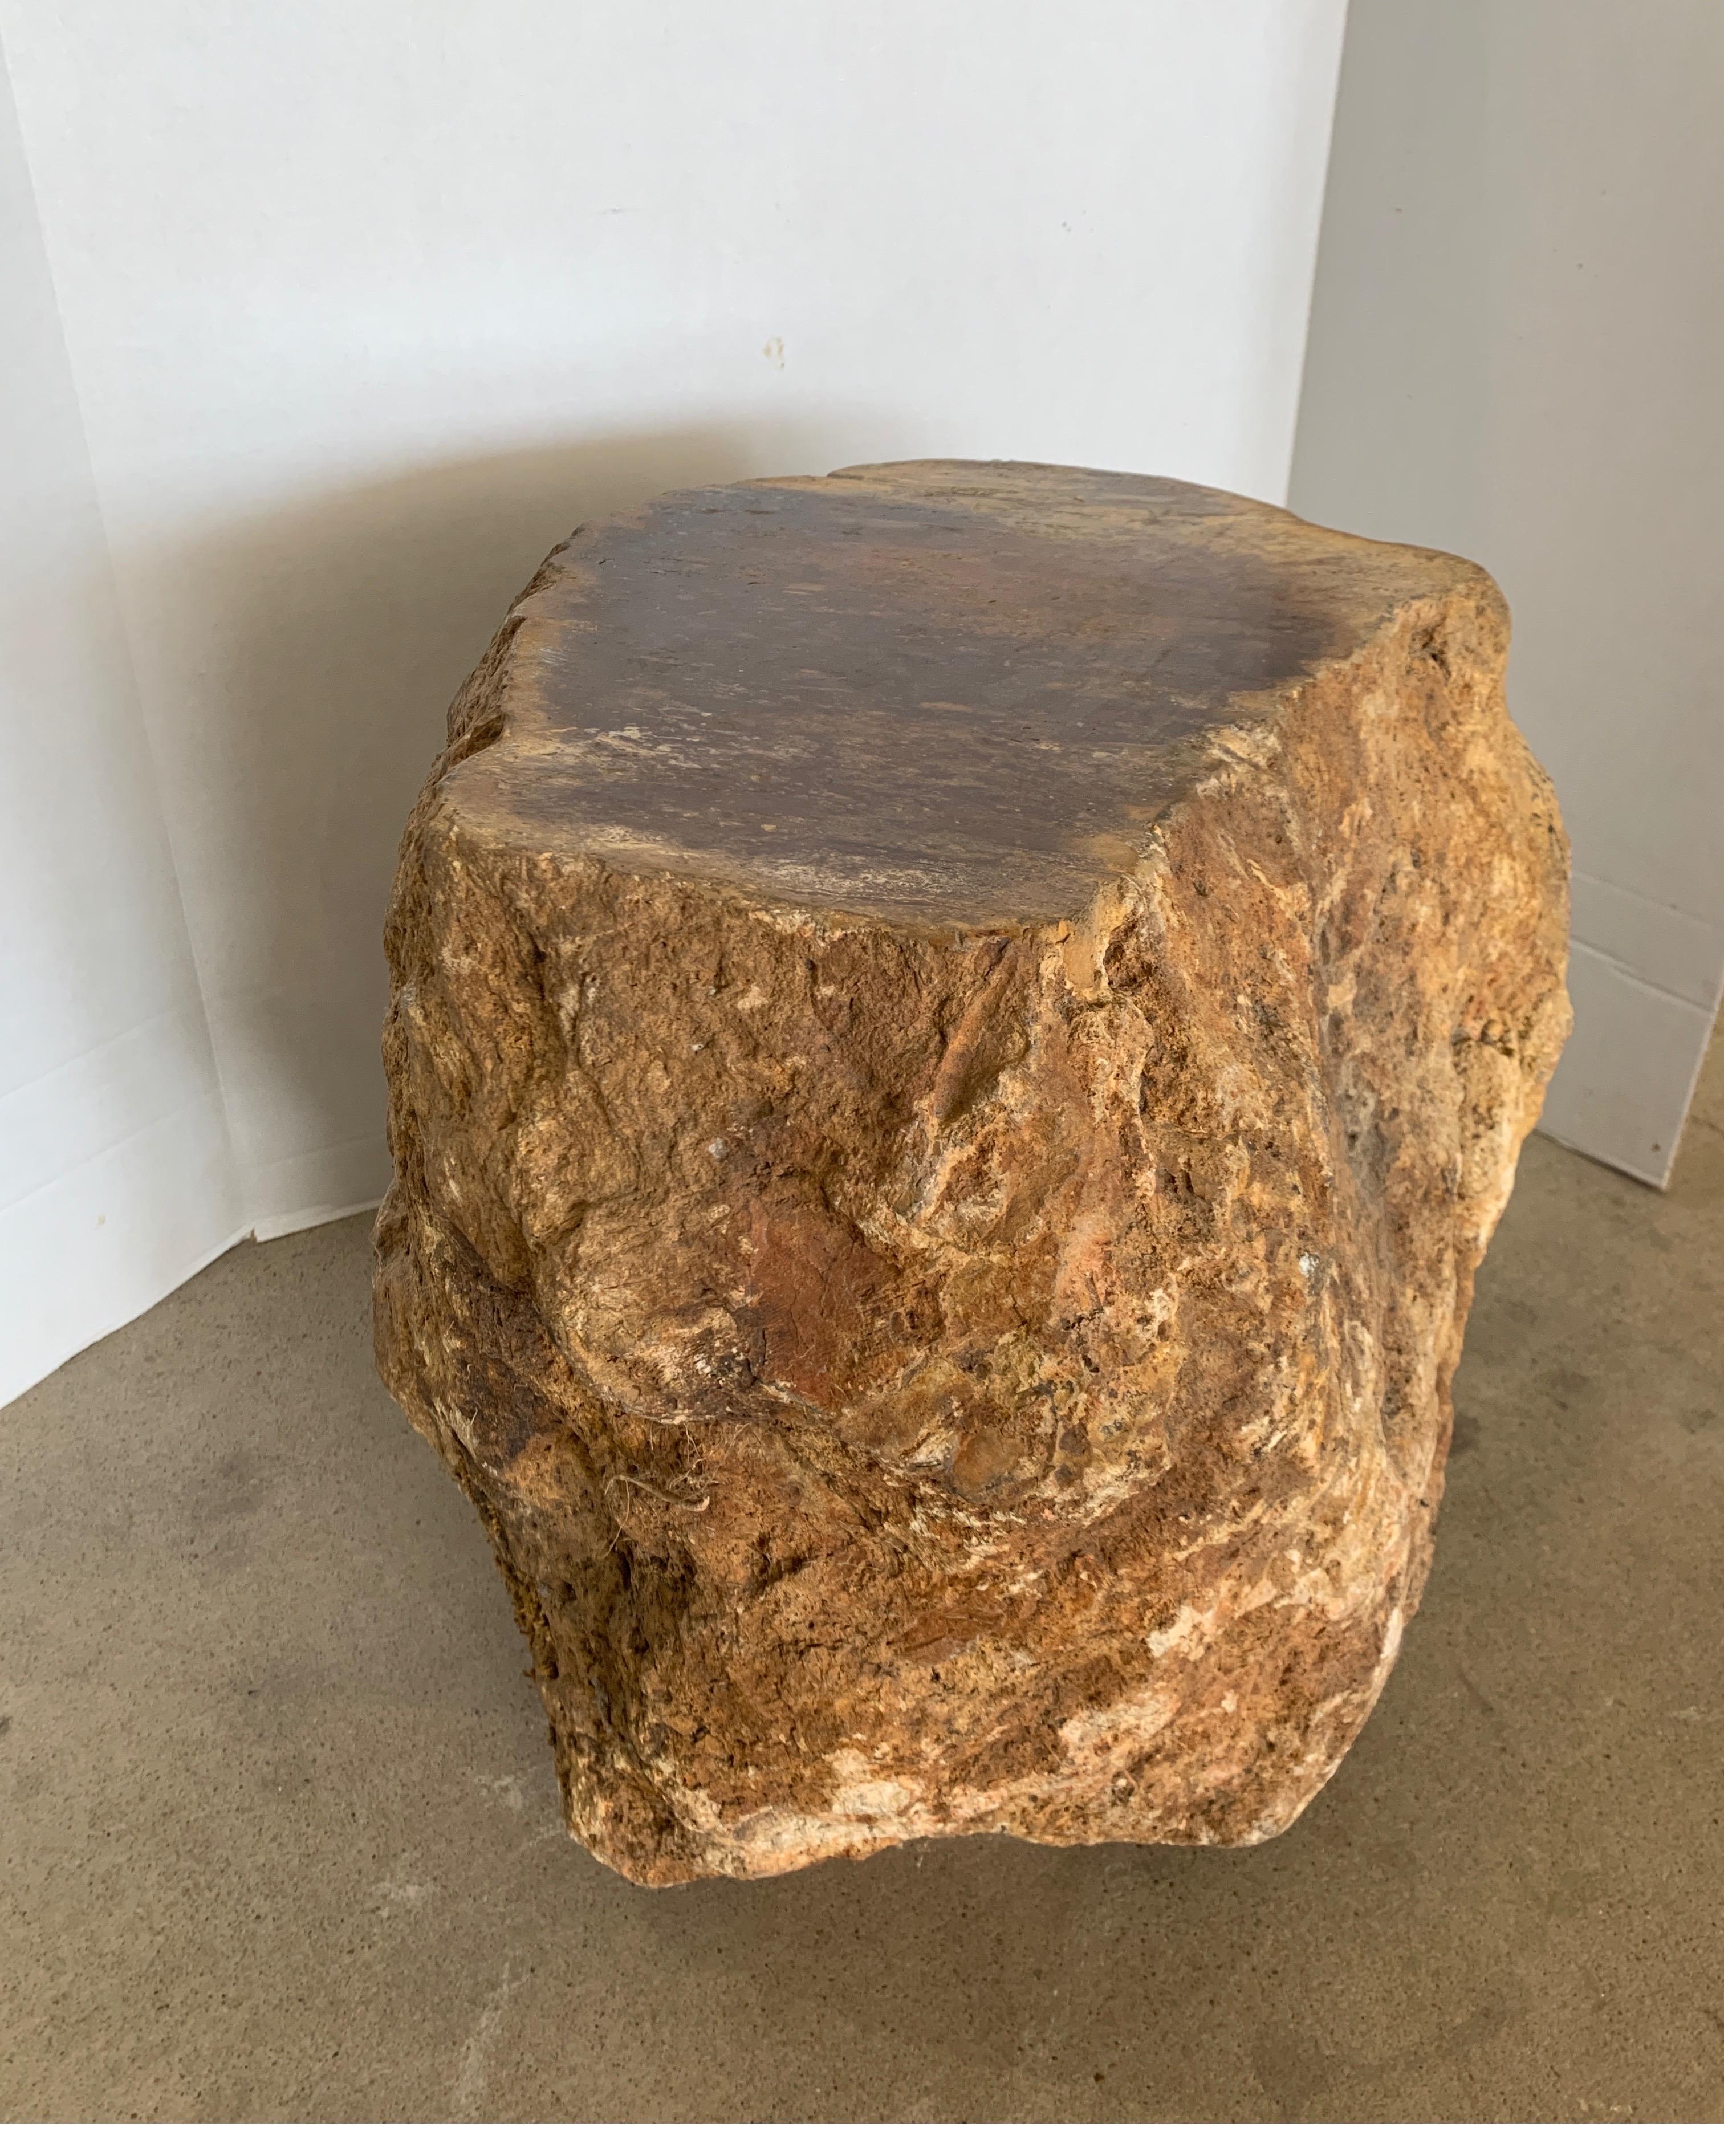 Malagasy Early Petrified Wood from Madagascar